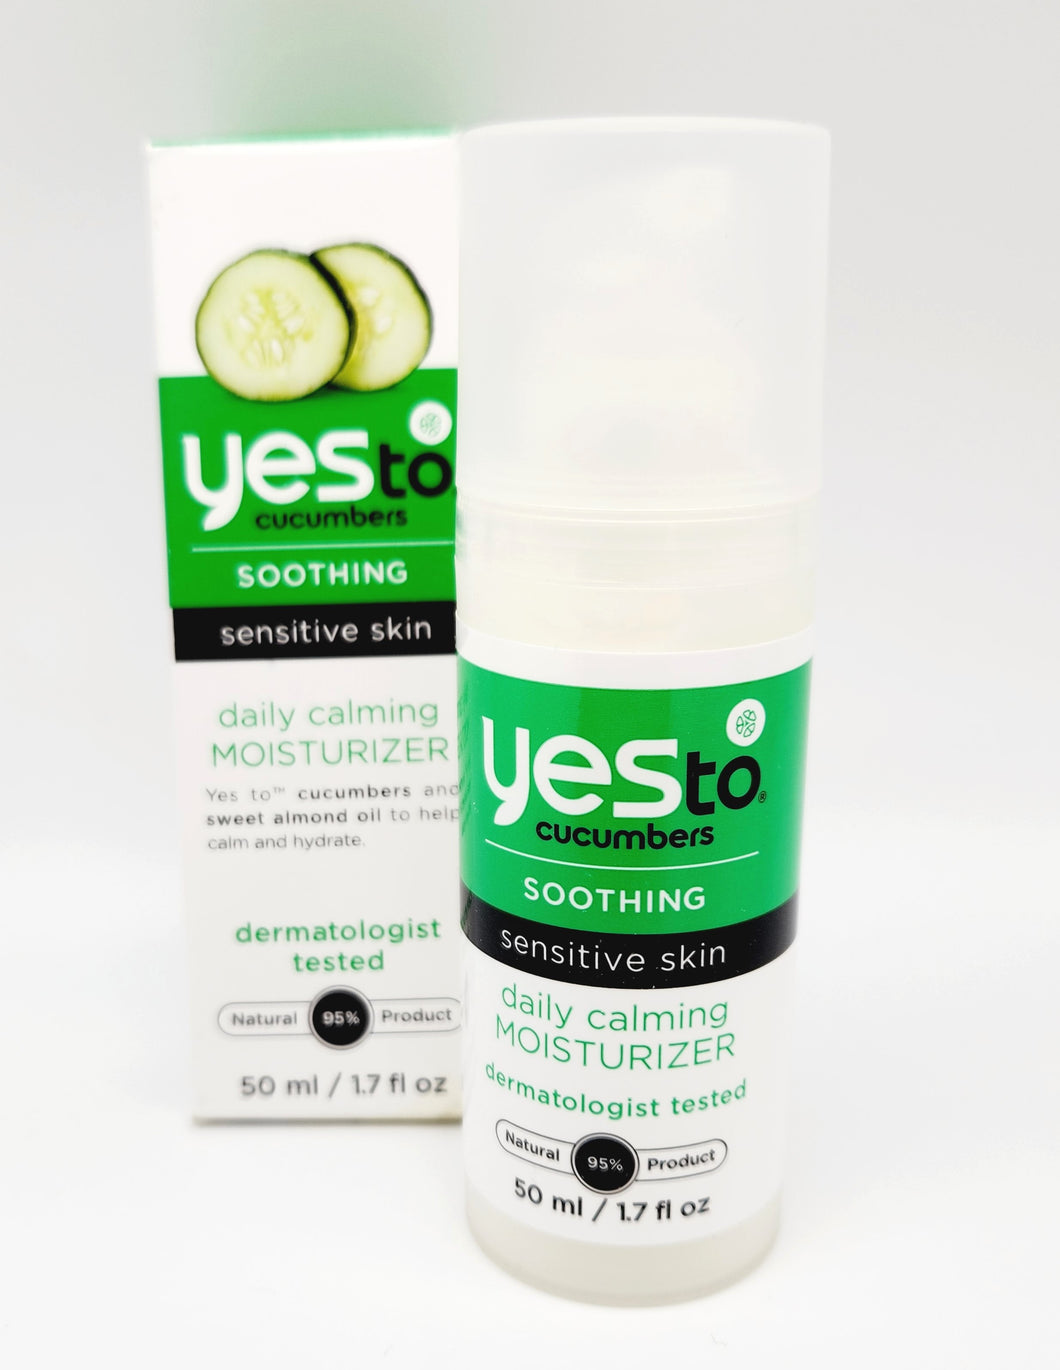 Yes to Cucumbers Daily calming moisturizer for Sensitive skin 1.7 Fl Oz